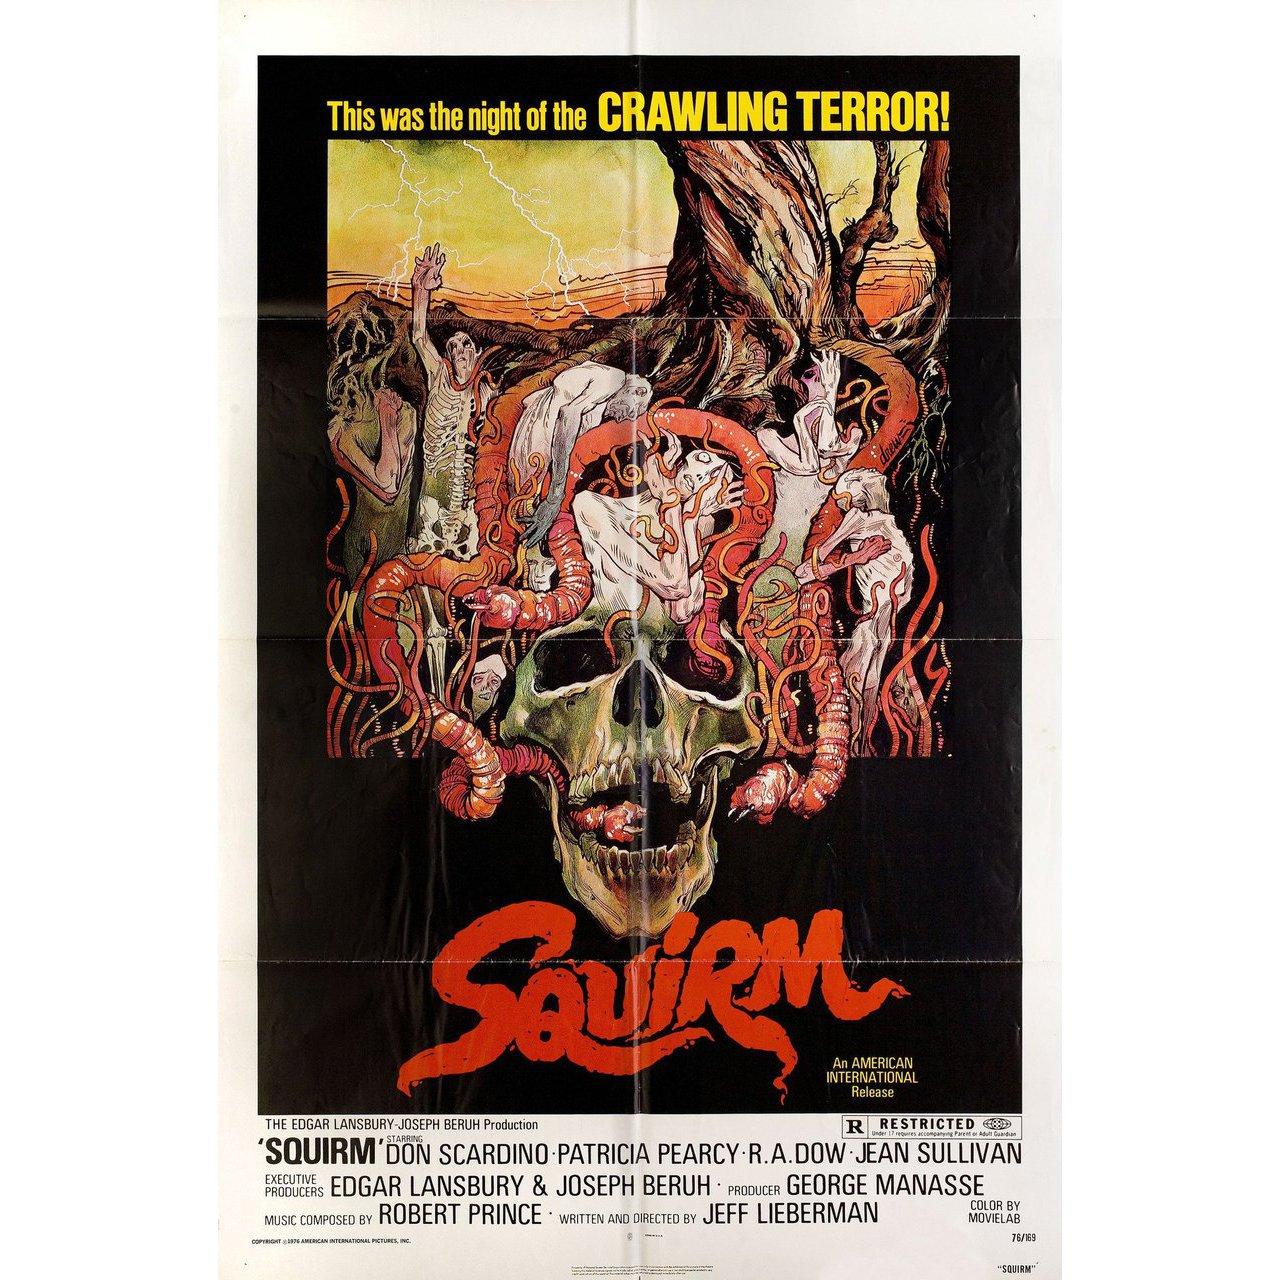 Original 1976 U.S. one sheet poster by Drew Struzan for the film Squirm directed by Jeff Lieberman with Don Scardino / Patricia Pearcy / R.A. Dow / Jean Sullivan. Very good condition, folded. Many original posters were issued folded or were